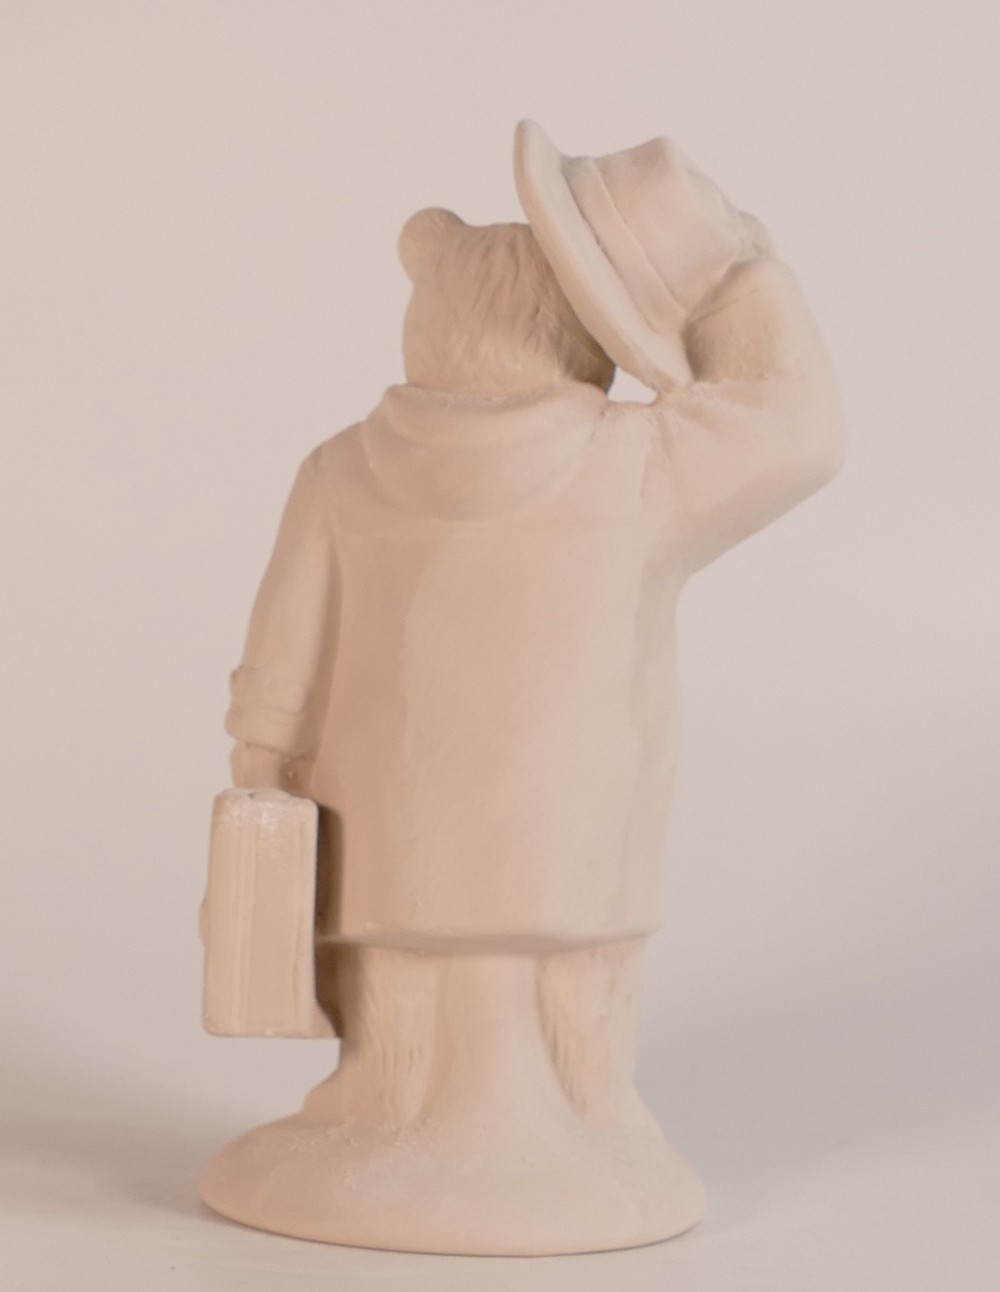 Wade Bisque figure of Paddington Bear, height 18cm. This was removed from the archives of the Wade - Image 2 of 4